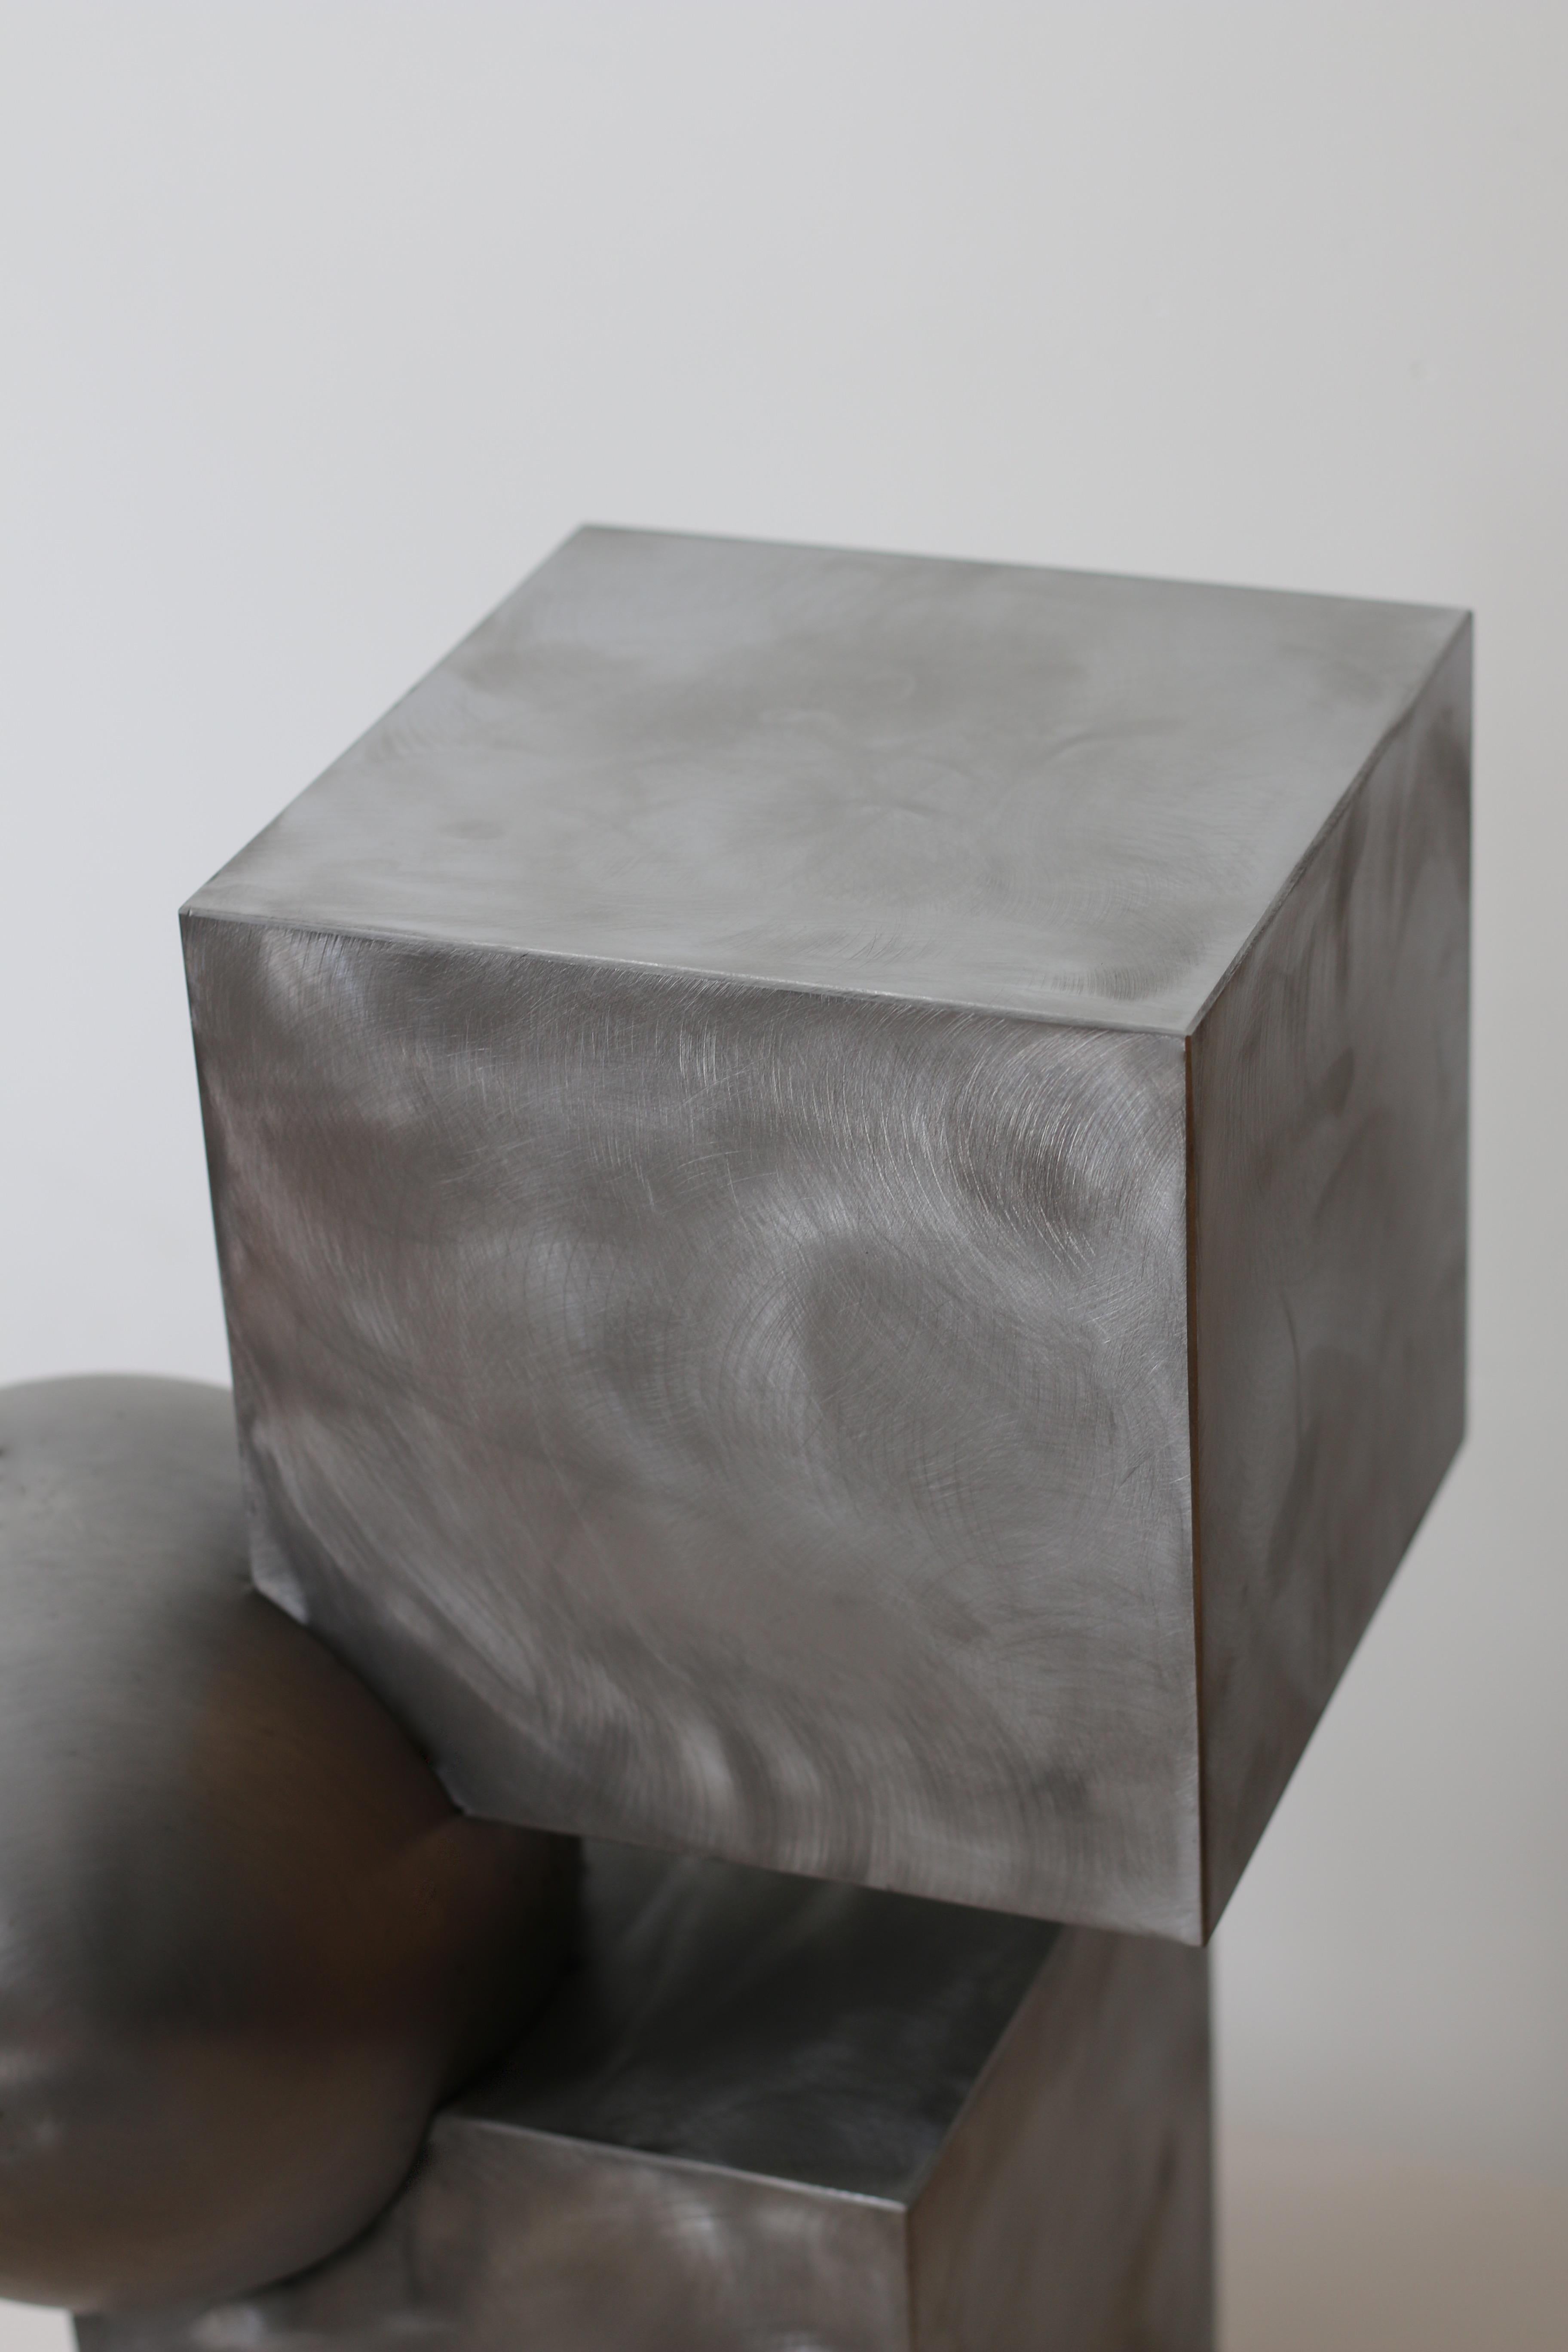 This is the newest version of best-selling 'Ice Cube' sculptural side table in brushed steel by Studio Experimental head designer Sabine Mezkaze Berzina.
It features clean geometry and Brutalist influenced design. Heavy weight and durable.